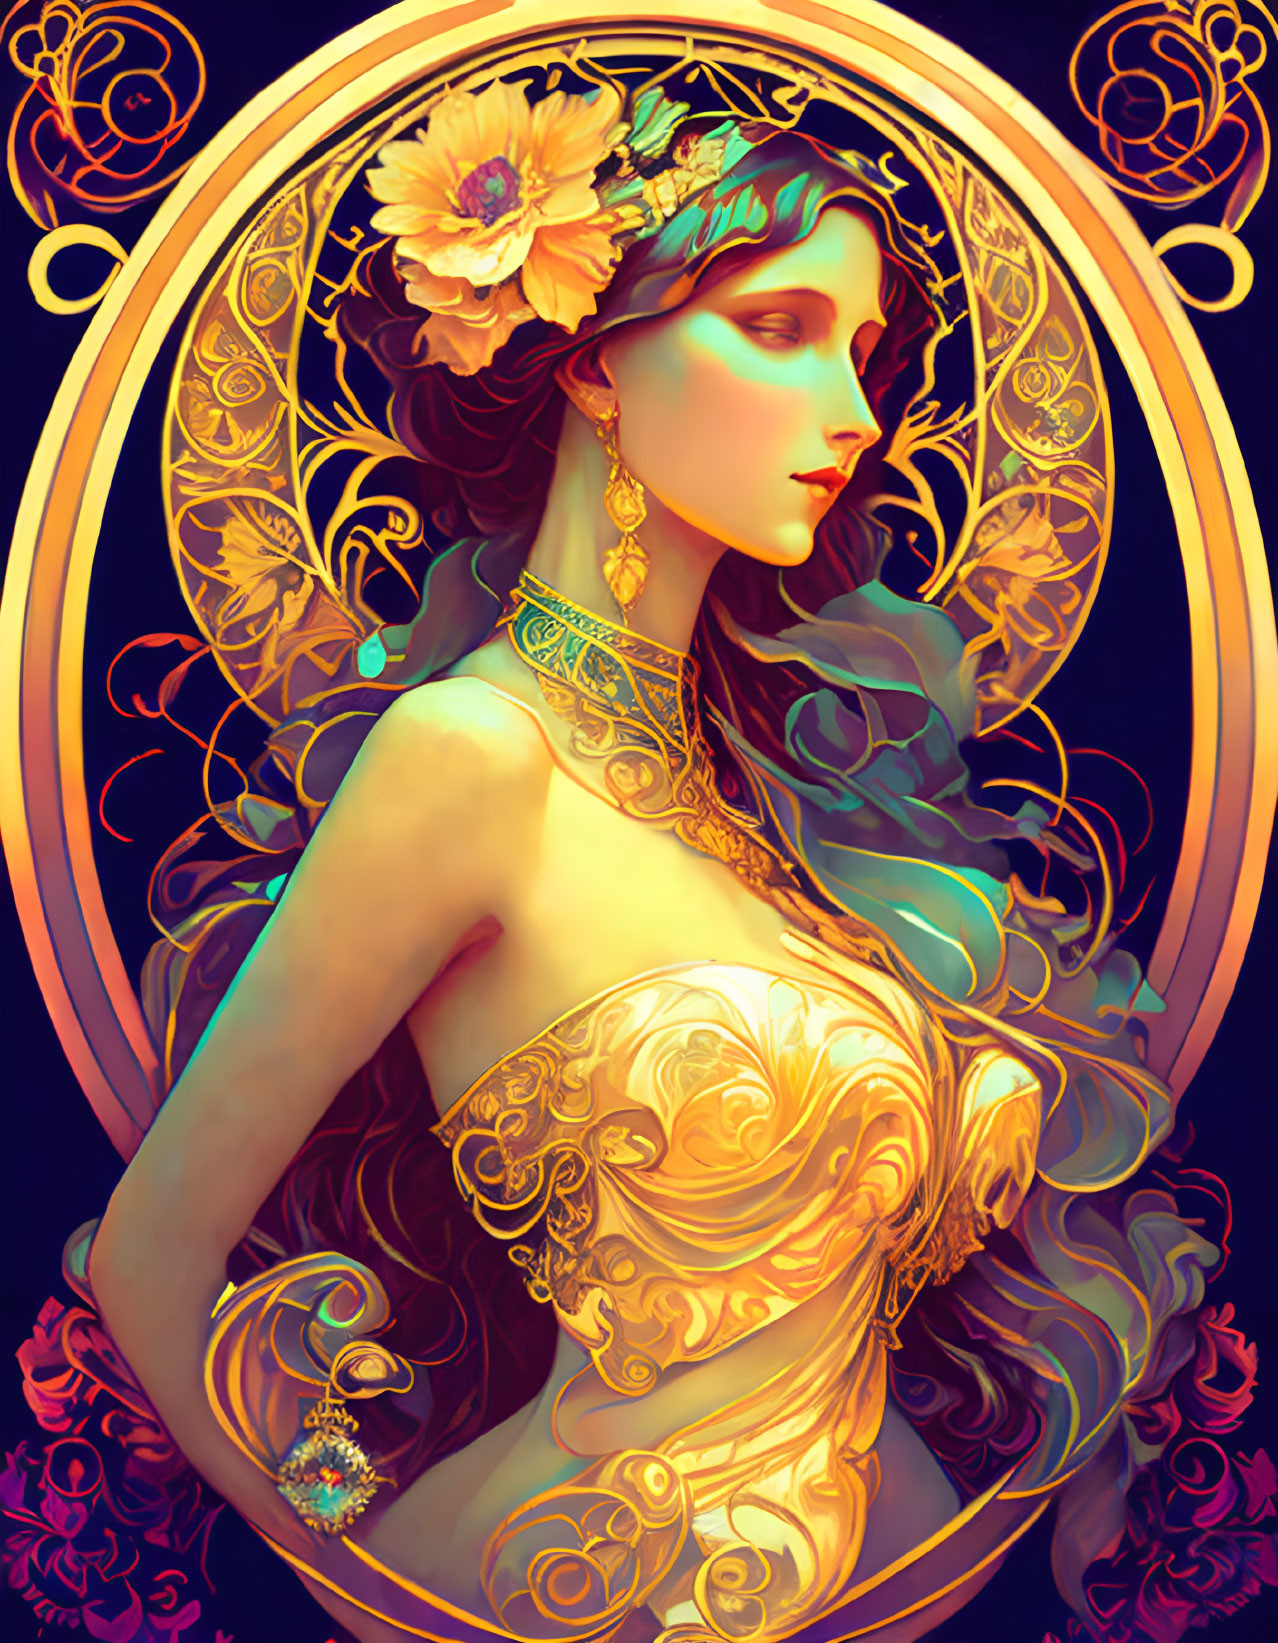 Art Nouveau Woman Illustration with Floral Headband and Butterflies